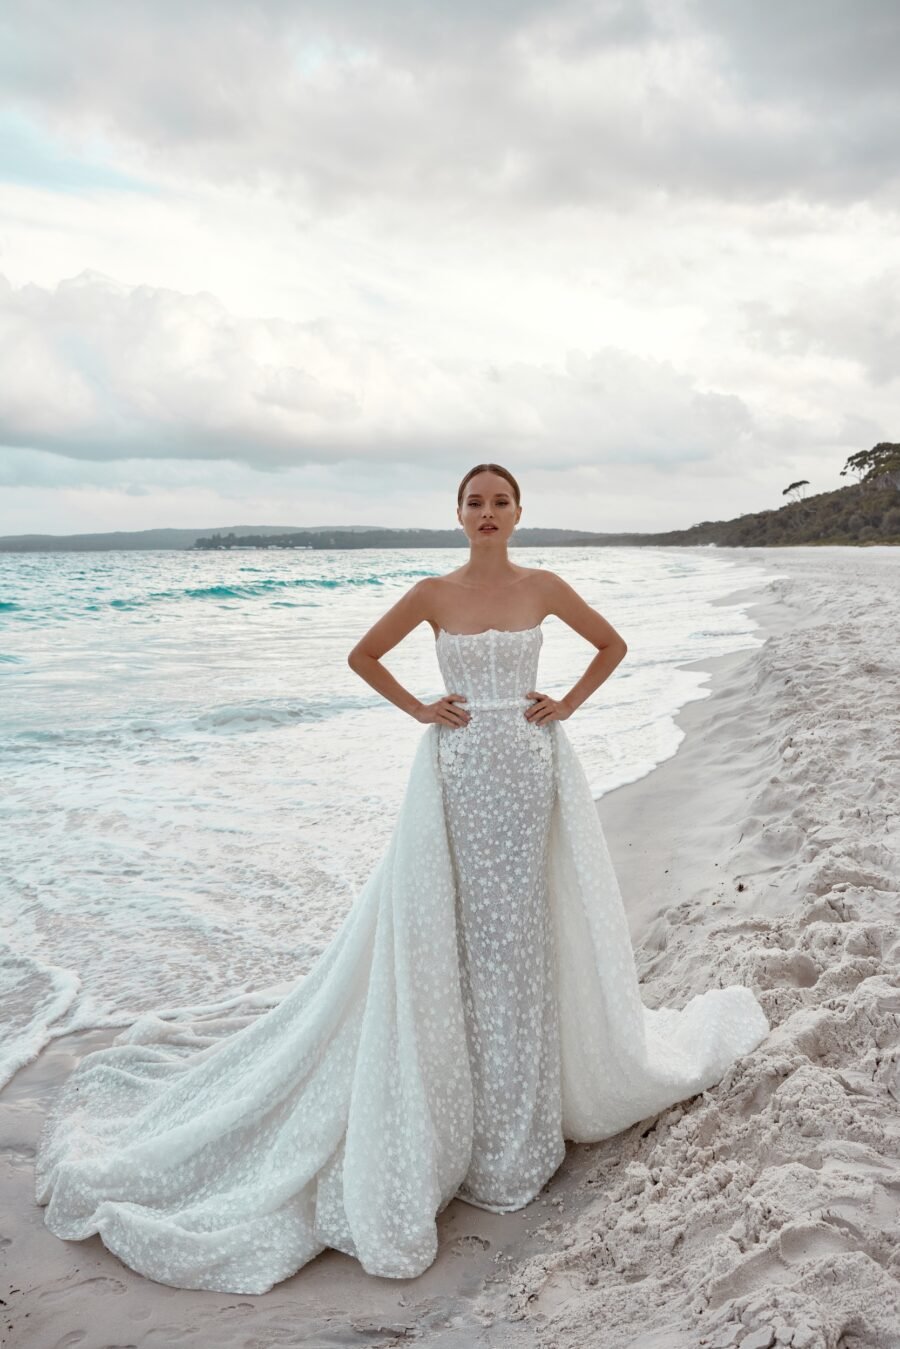 Alaia 1 wedding dress by woná concept from atelier signature collection